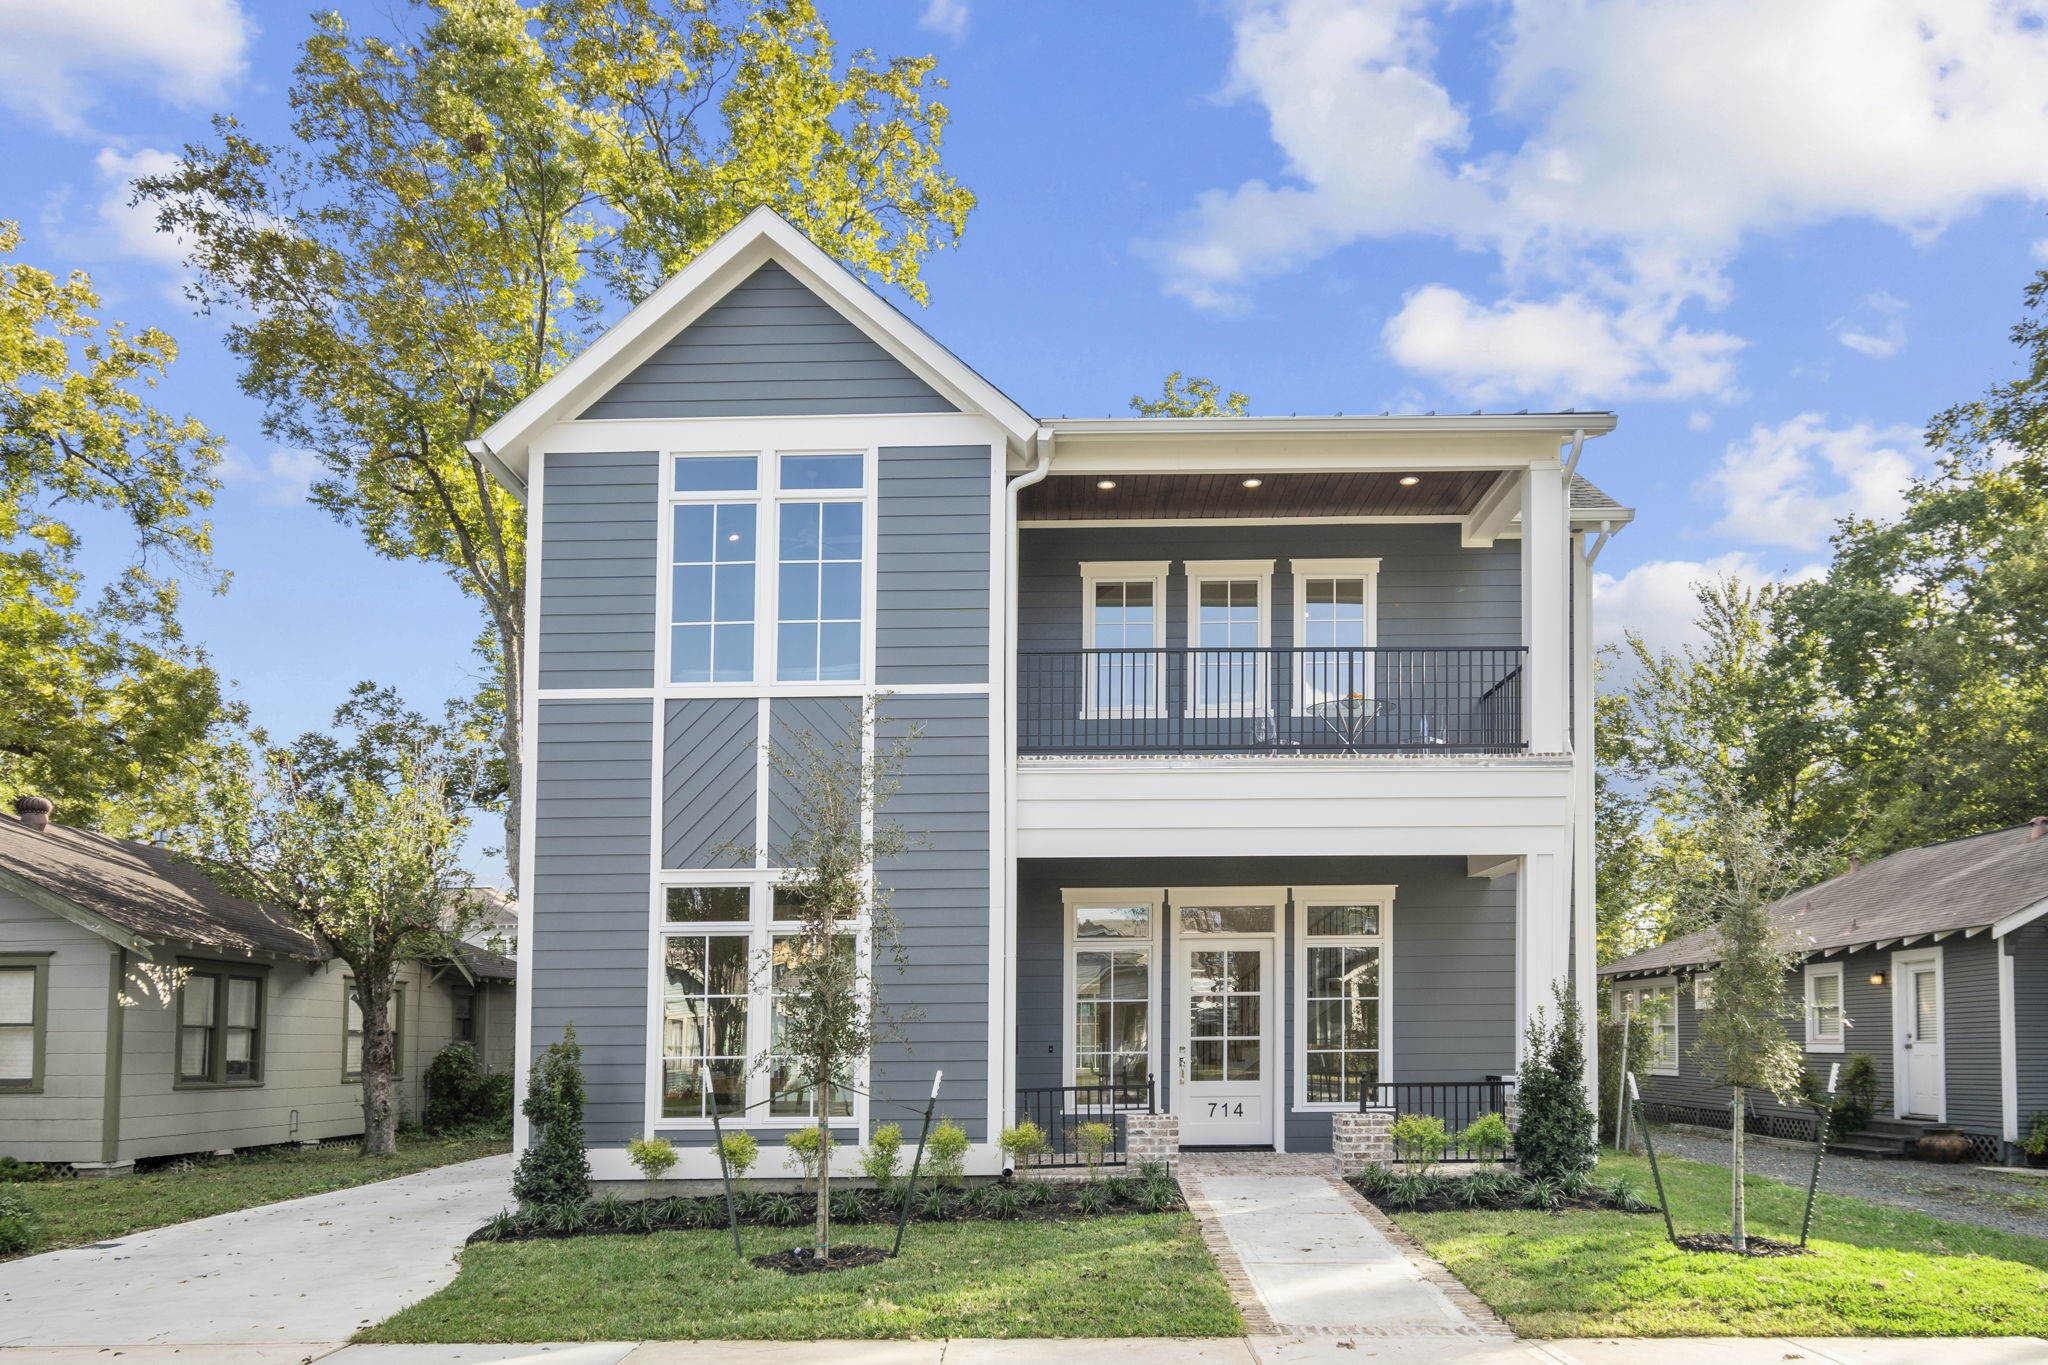 Located in the heart of the Heights, 714 E. 13th 1/2 Street is a brand new home that was constructed by Woodrock Homes featuring architecture from the award-winning firm, Brickmoon Design and interiors by Lynne T. Jones. ASID.